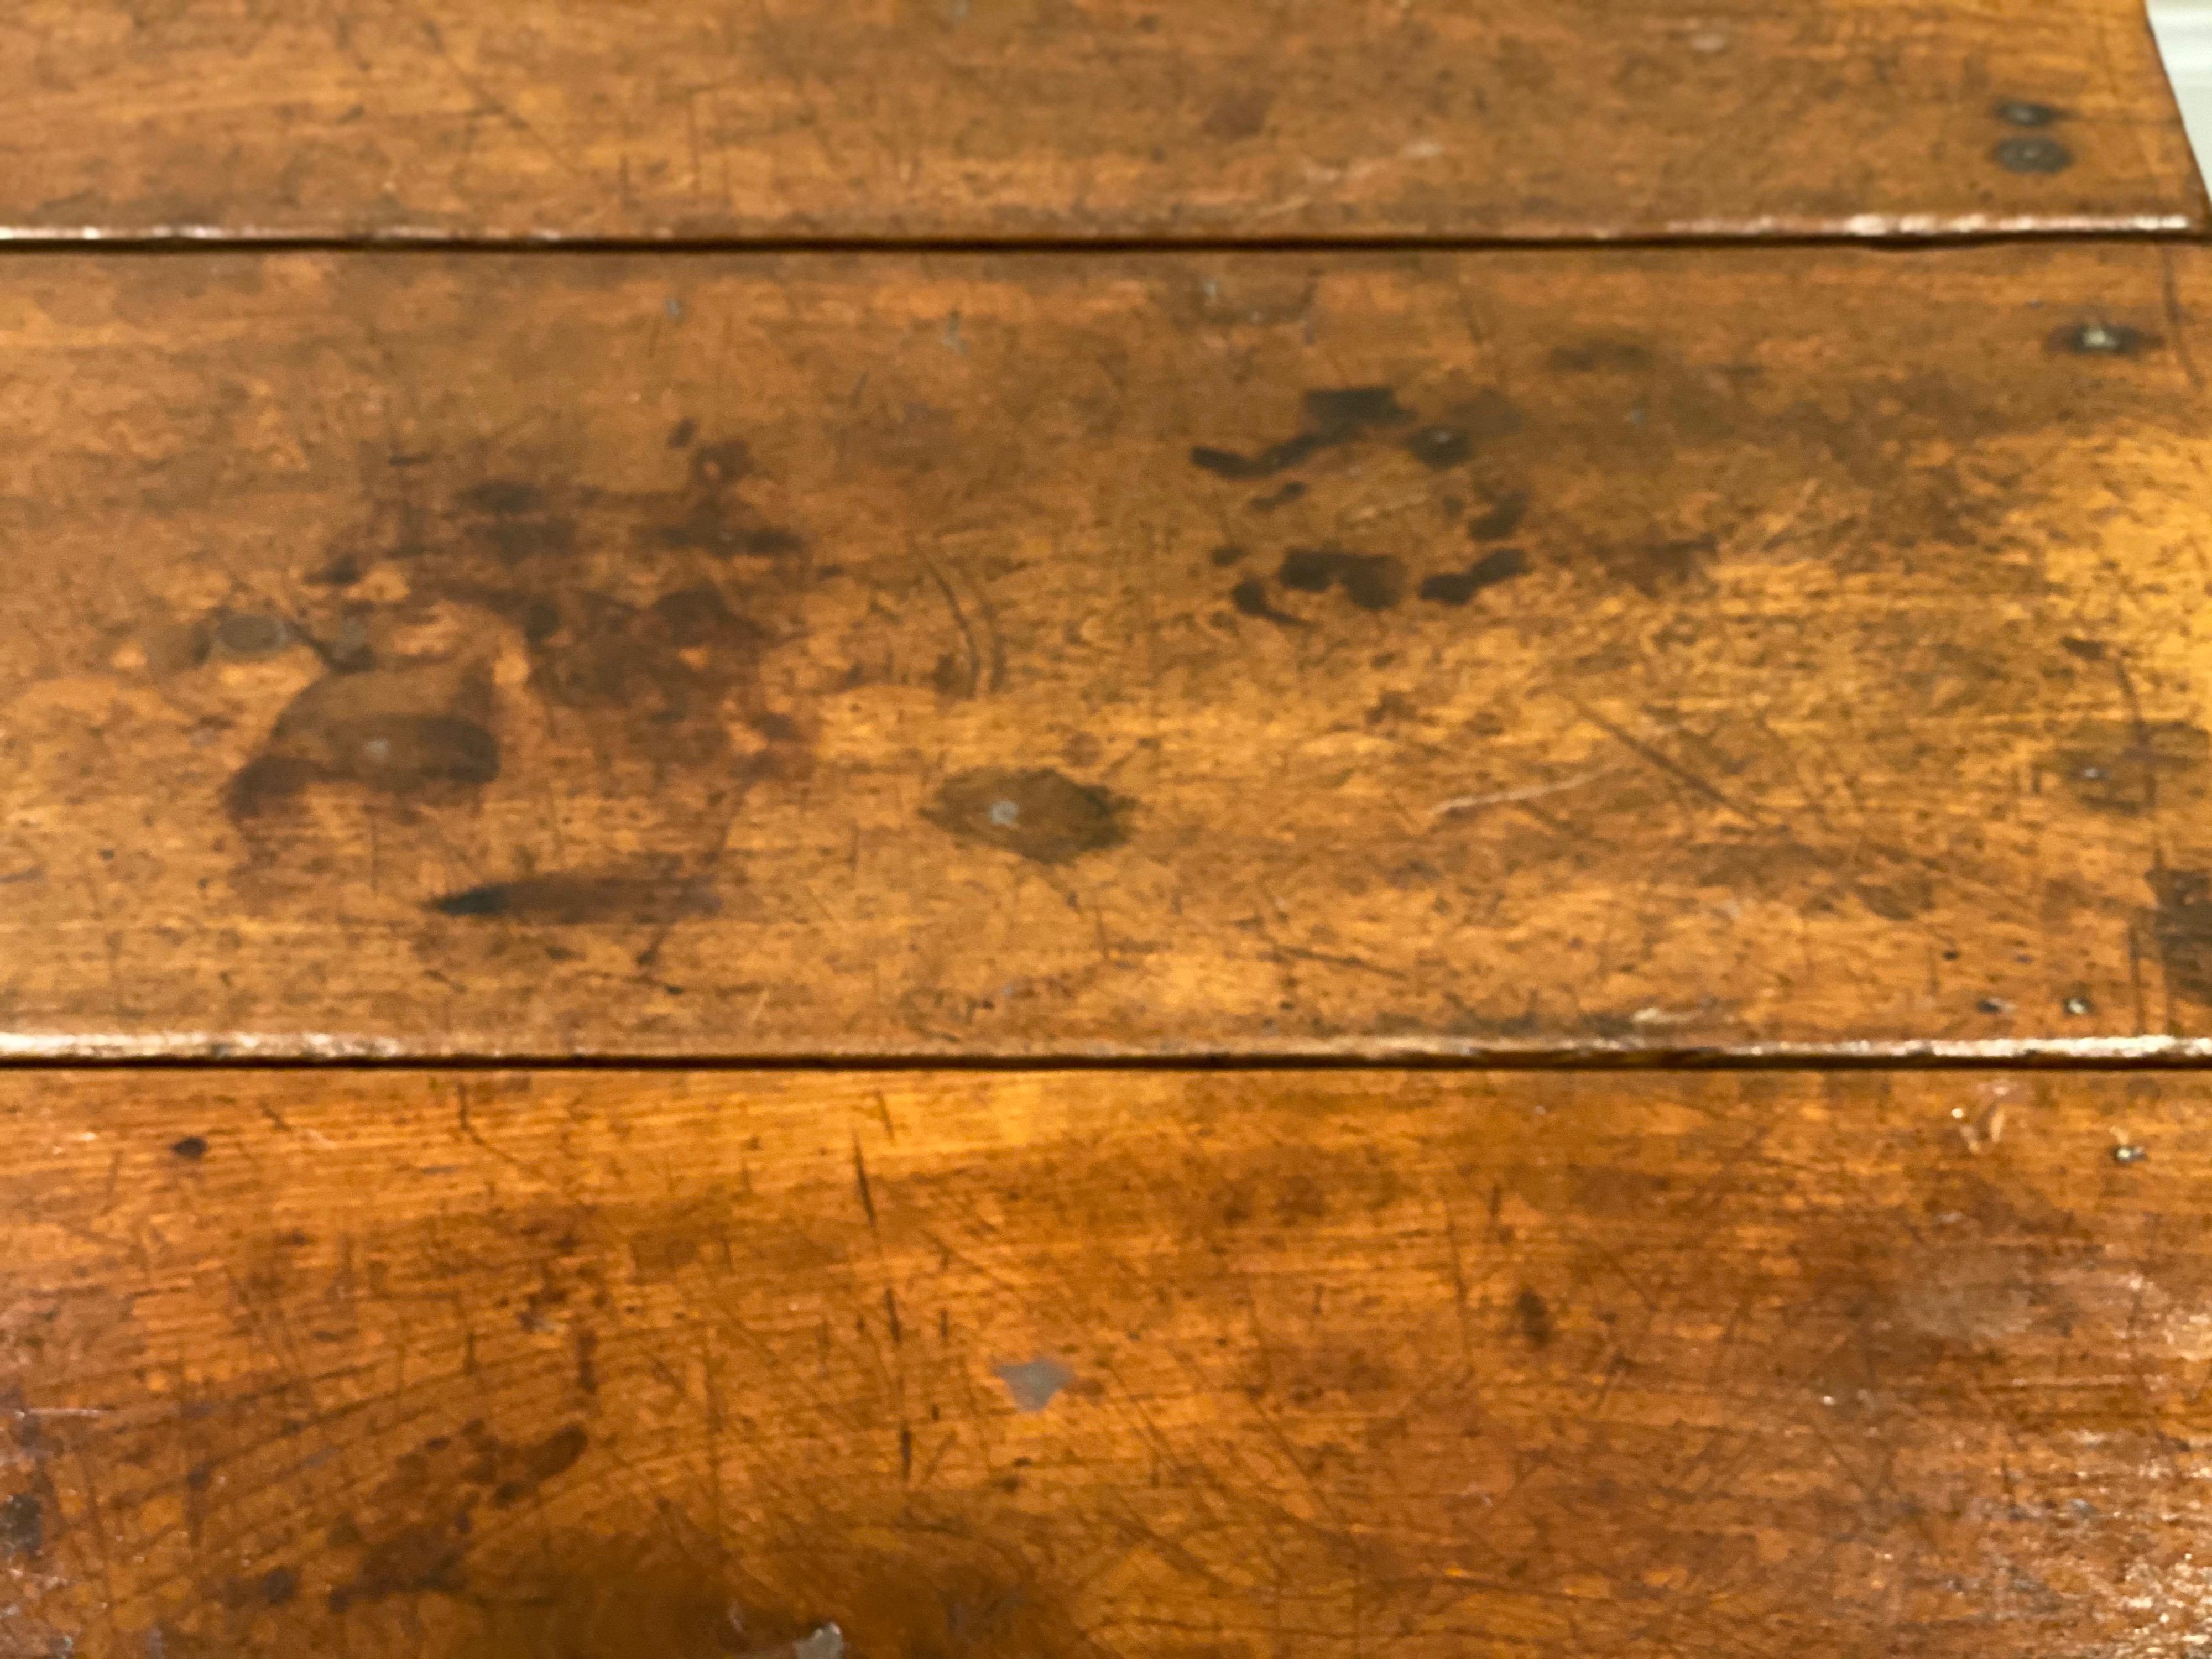 19th century American mahogany drop-leaf table
Tapered straight legs, one drawer, swing arm hold top on either side.
Slight separation to top, discolorations, slight bow to top. Nice patina and age. Structurally sound.

Measures: 38.25